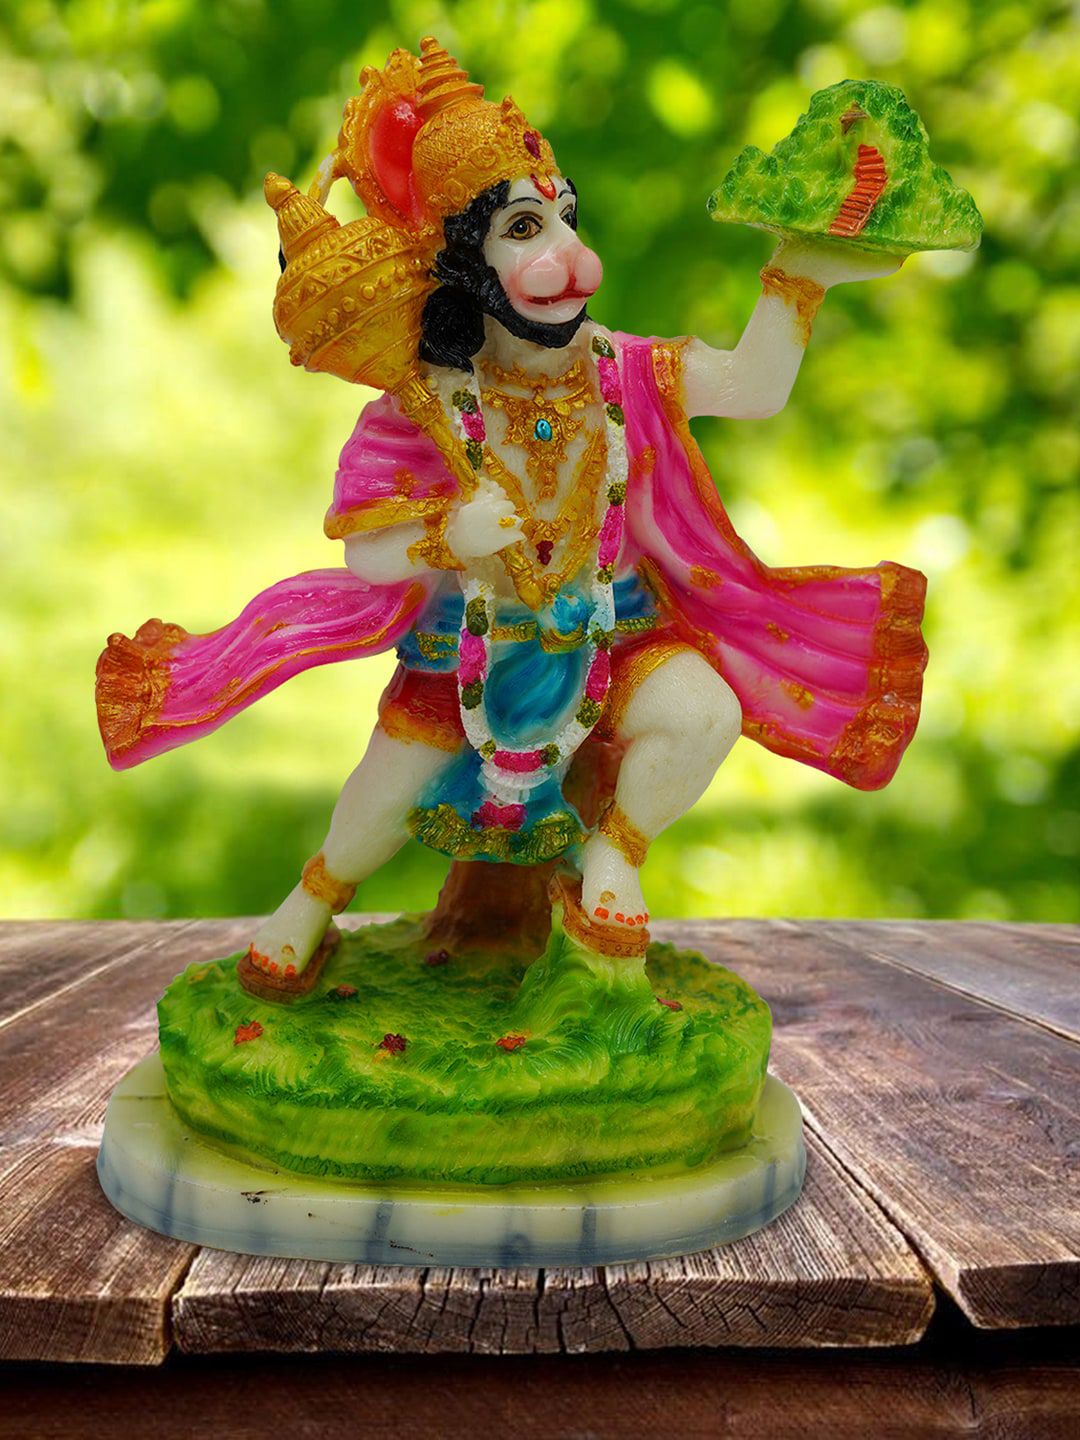 Gallery99 Green & Pink Lord Hanuman Showpieces Price in India